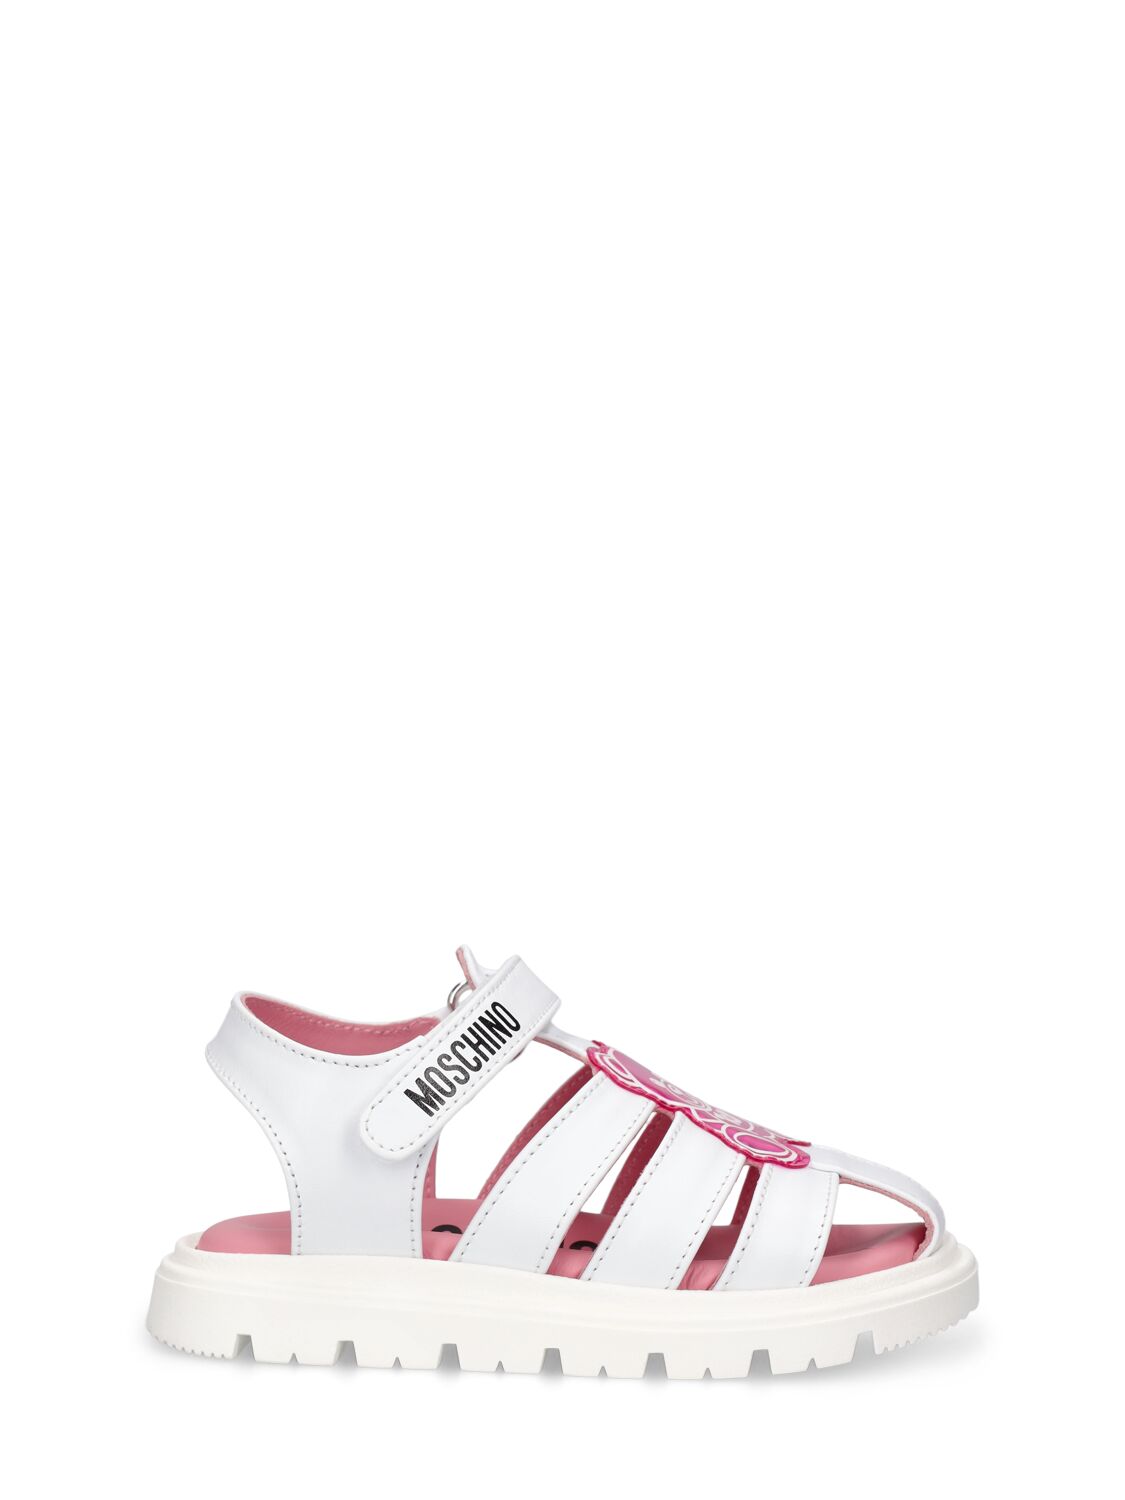 Moschino Kids' Logo Print Leather Sandals W/teddy Patch In White,pink